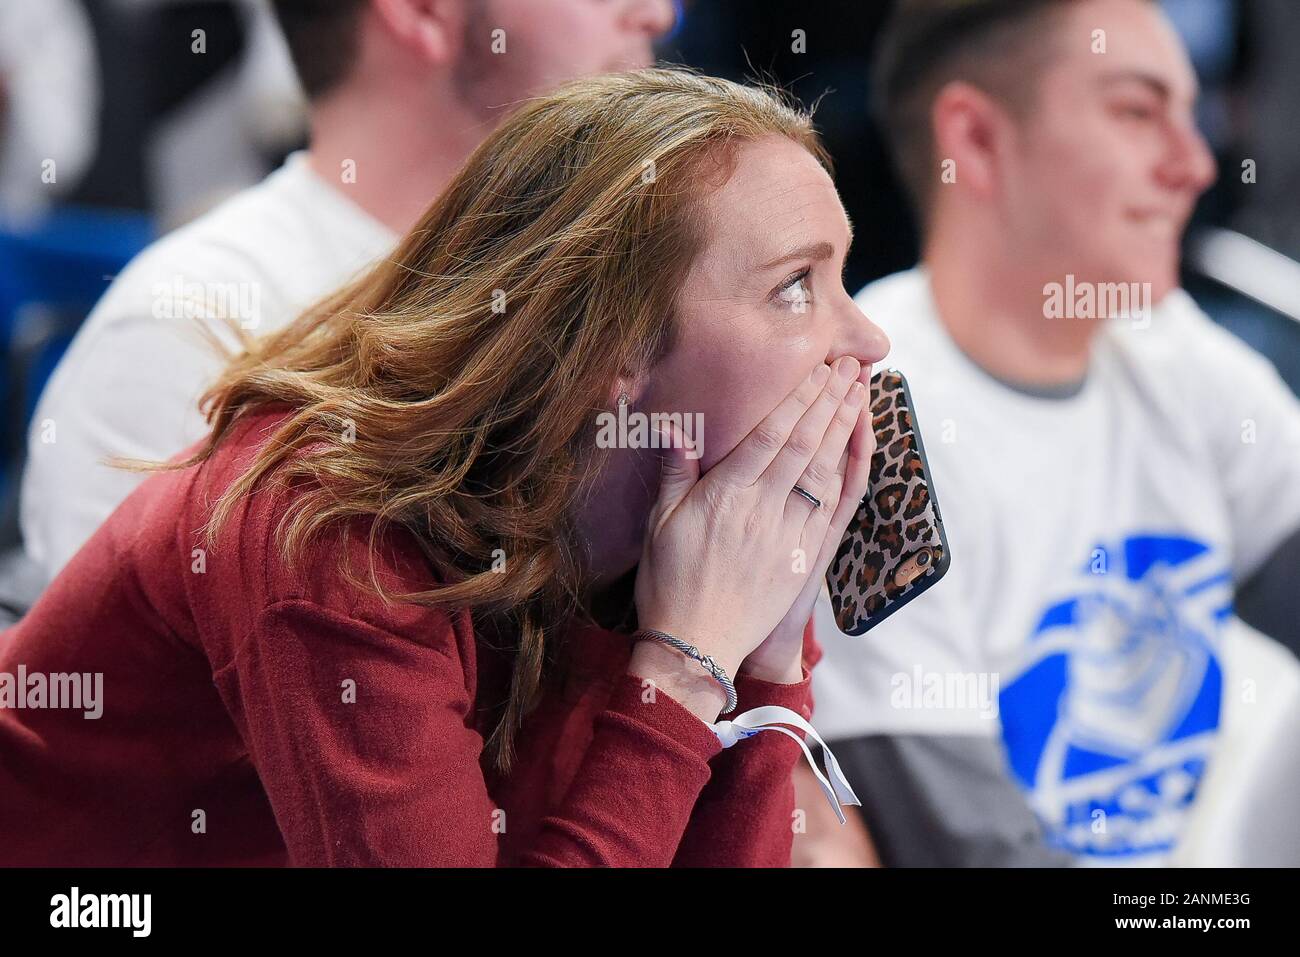 Jan 17, 2020: A Dayton fan watches her with concern as her team takes a free throw trying to take the lead late in the second half during an Atlantic 10 conference game where the Dayton Flyers visited the St. Louis Billikens. Held at Chaifetz Arena in St. Louis, MO Richard Ulreich/CSM Stock Photo